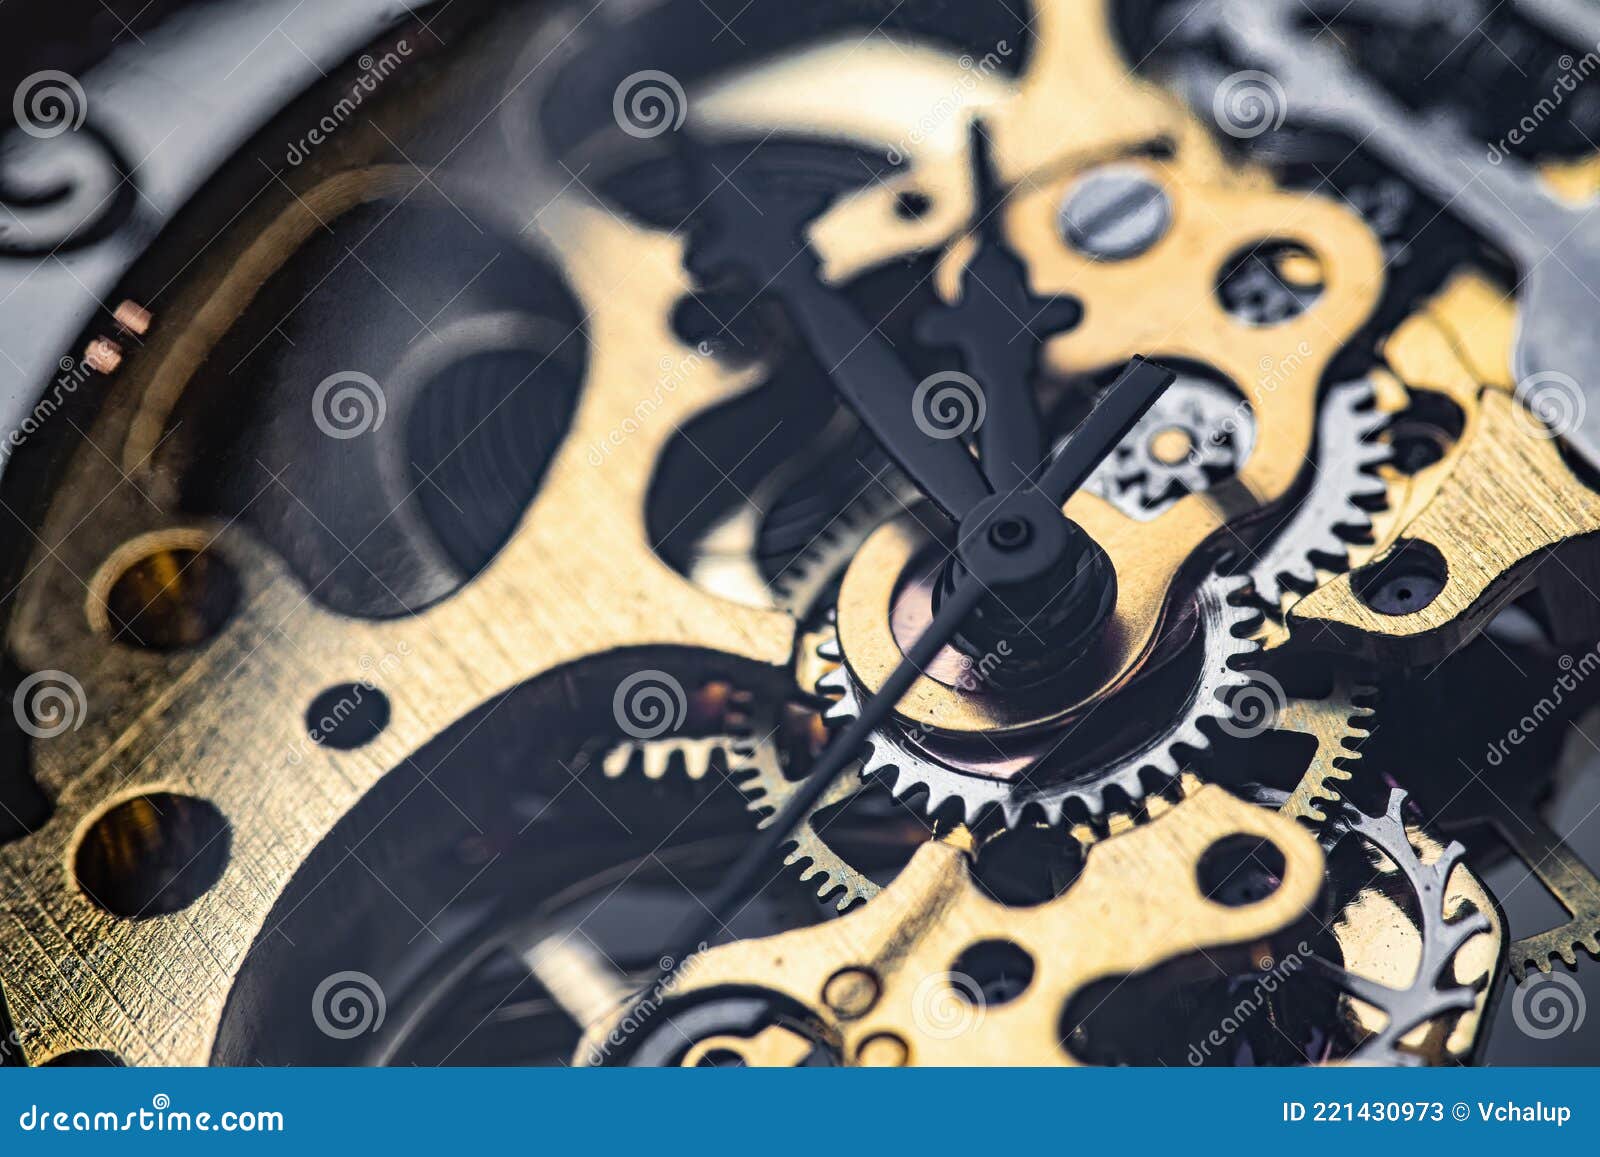 Gears and Cogs Inside Clock. Close-up View on Retro Watches. Stock Image -  Image of watch, gears: 221430973